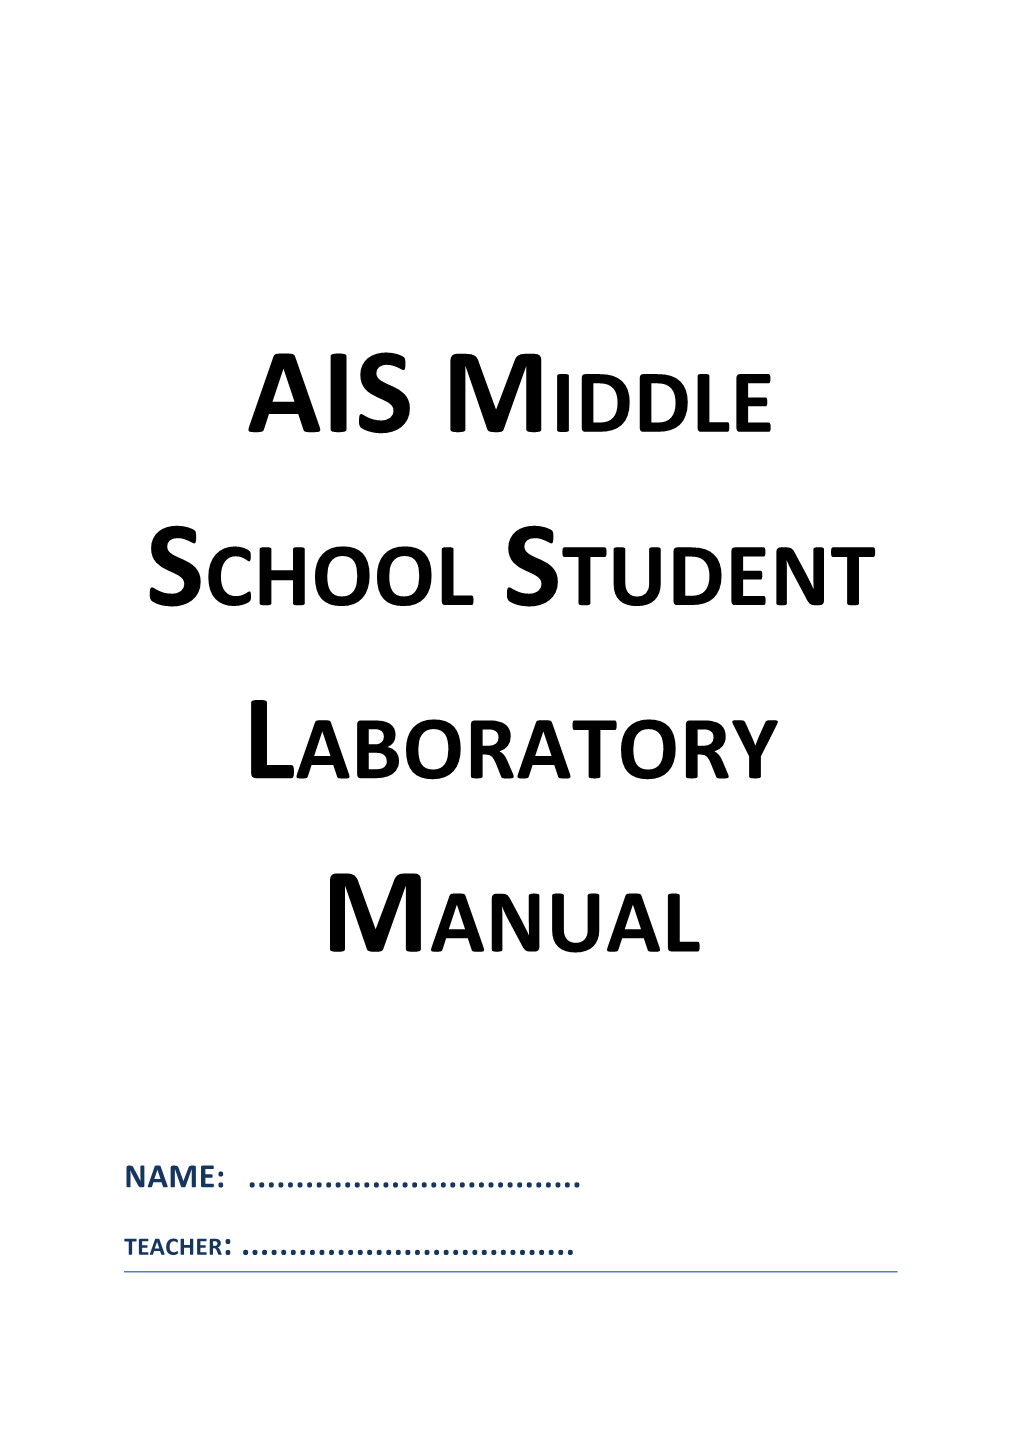 AIS Middle School Student Laboratory Manual